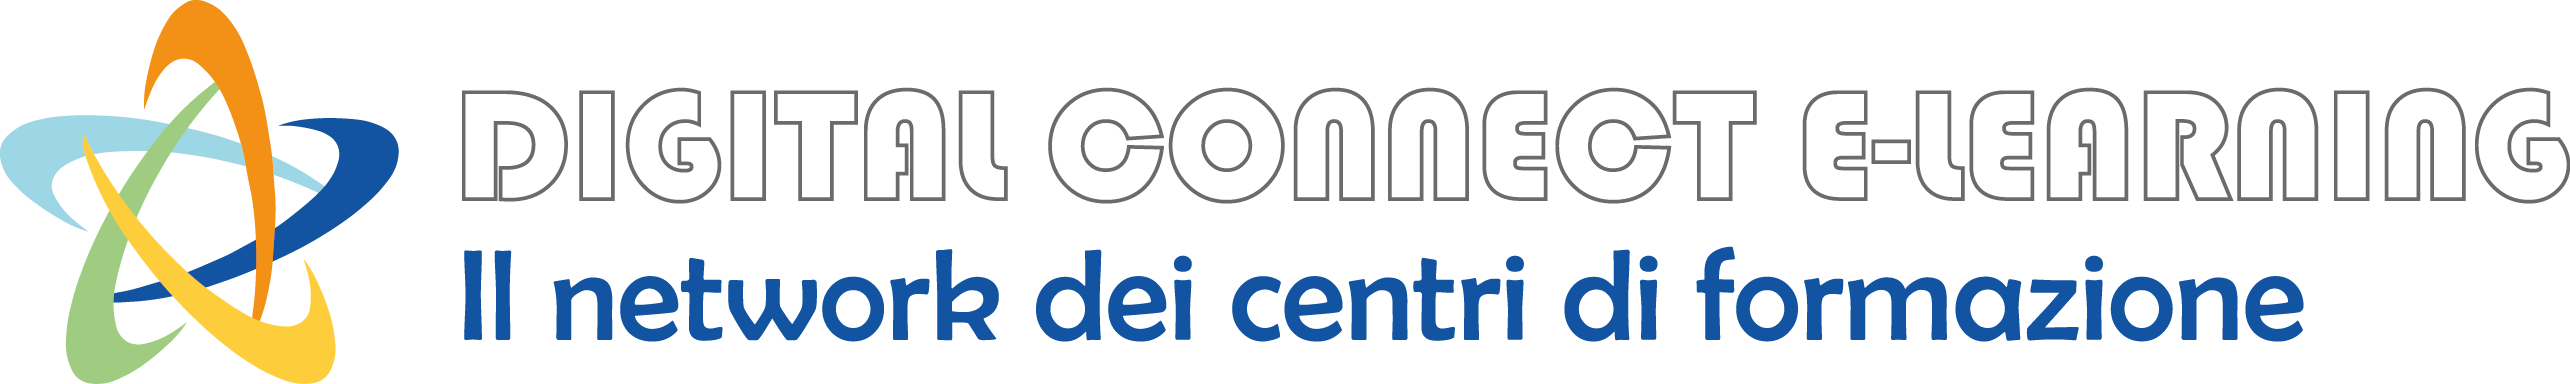 Digital Connect Elearning